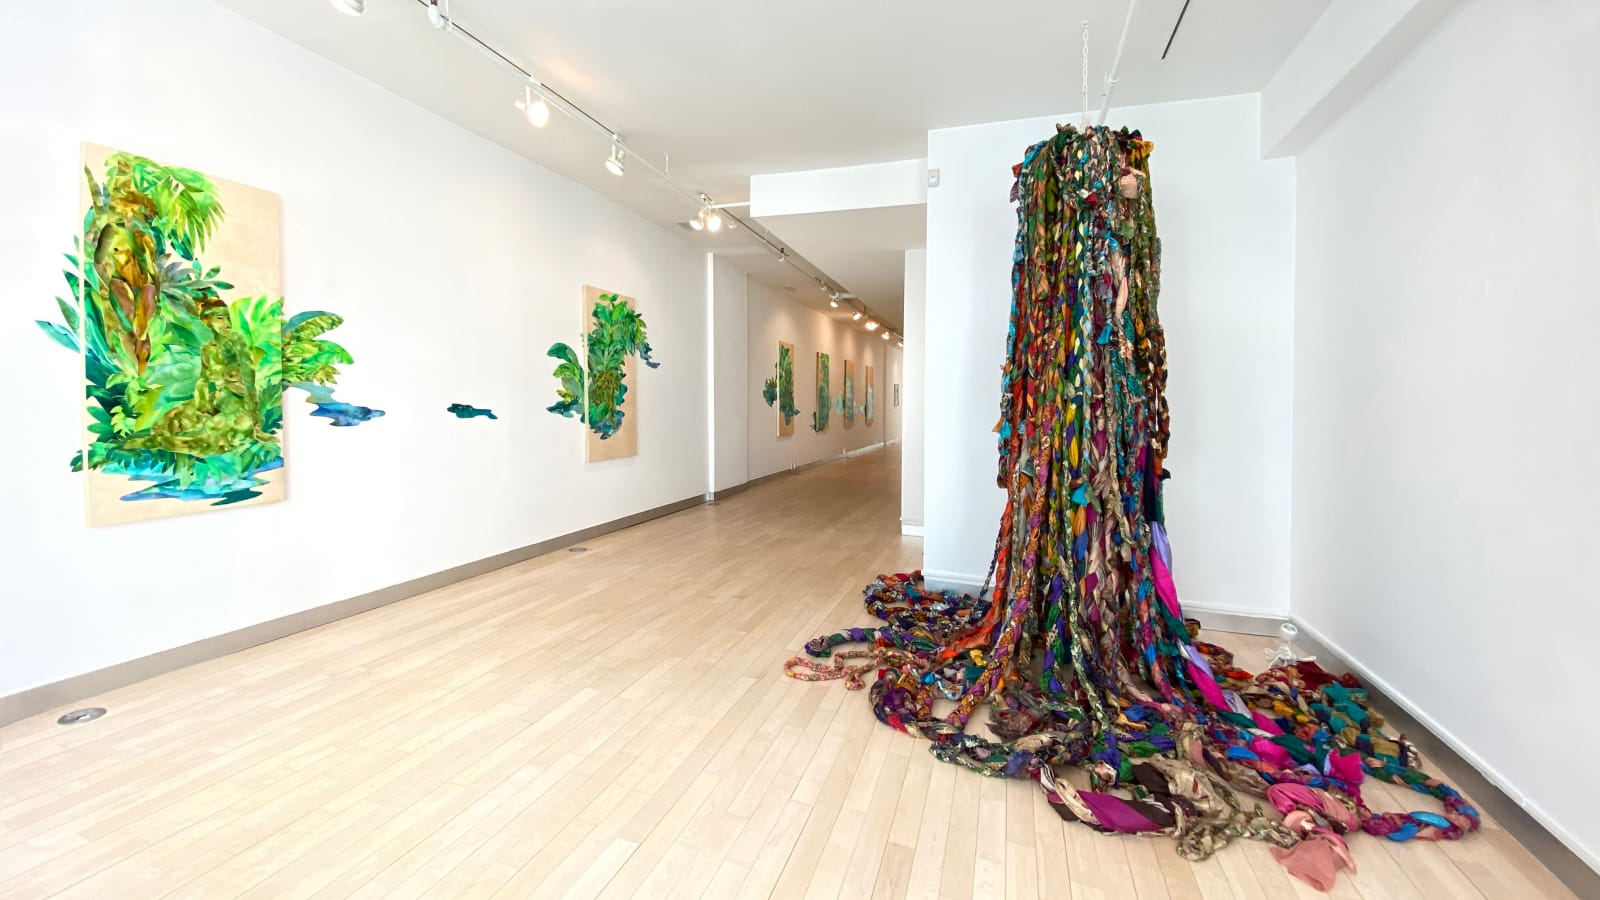 Hollis Taggart Contemporary, 514 West 25th Street, 2nd Floor, New York, NY (2019–2020)